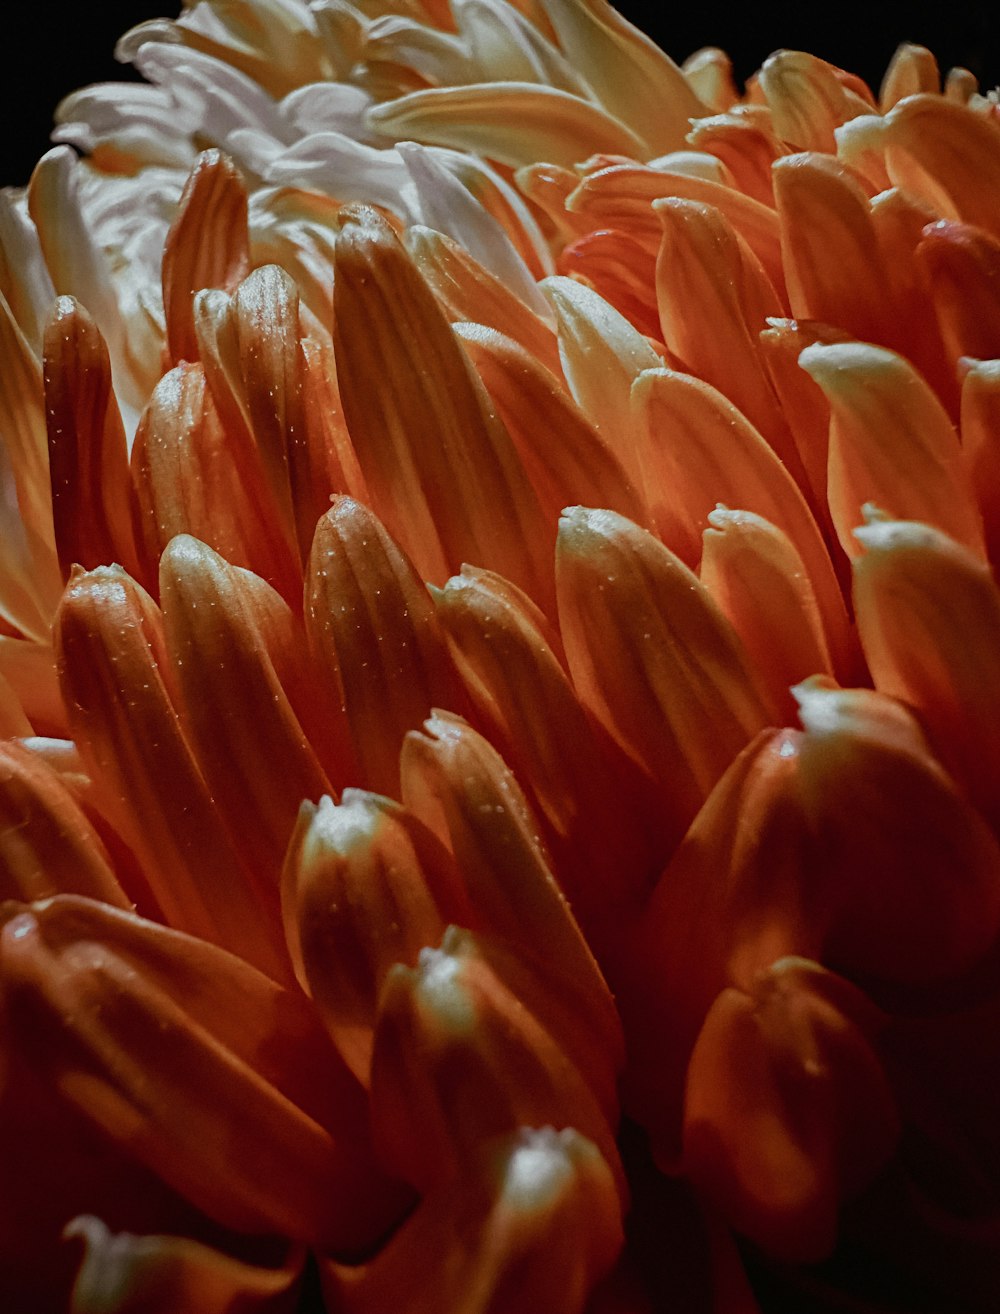 a close up of an orange flower with drops of water on it